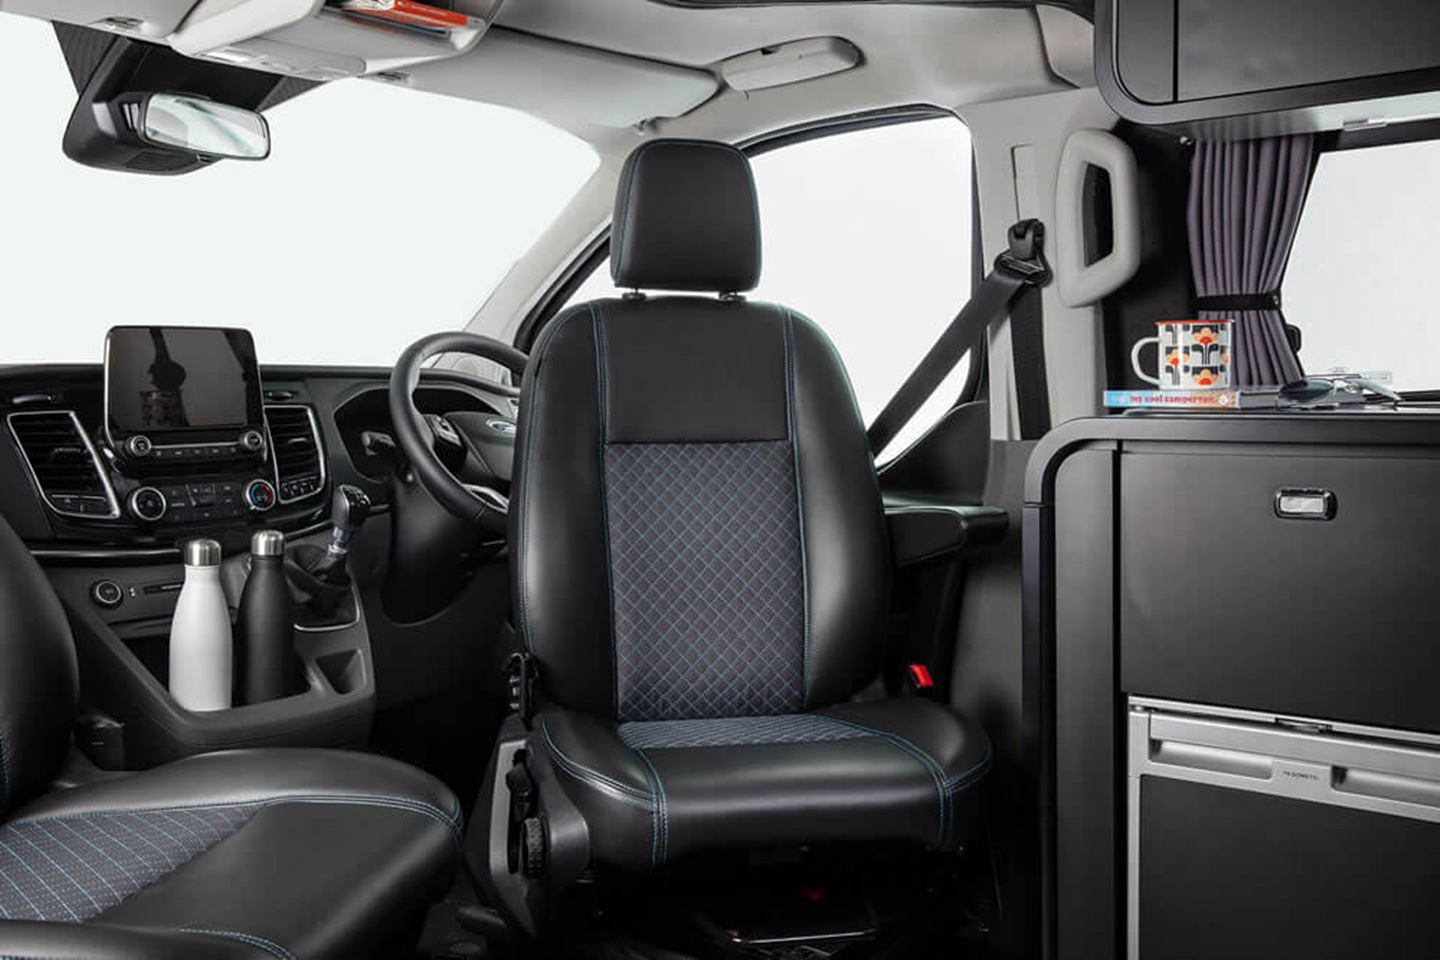 As a Ford Transit Titanium-based mobile home, it has an 8-inch infotainment screen with Apple CarPlay and Android Auto connectivity, and a rearview camera.